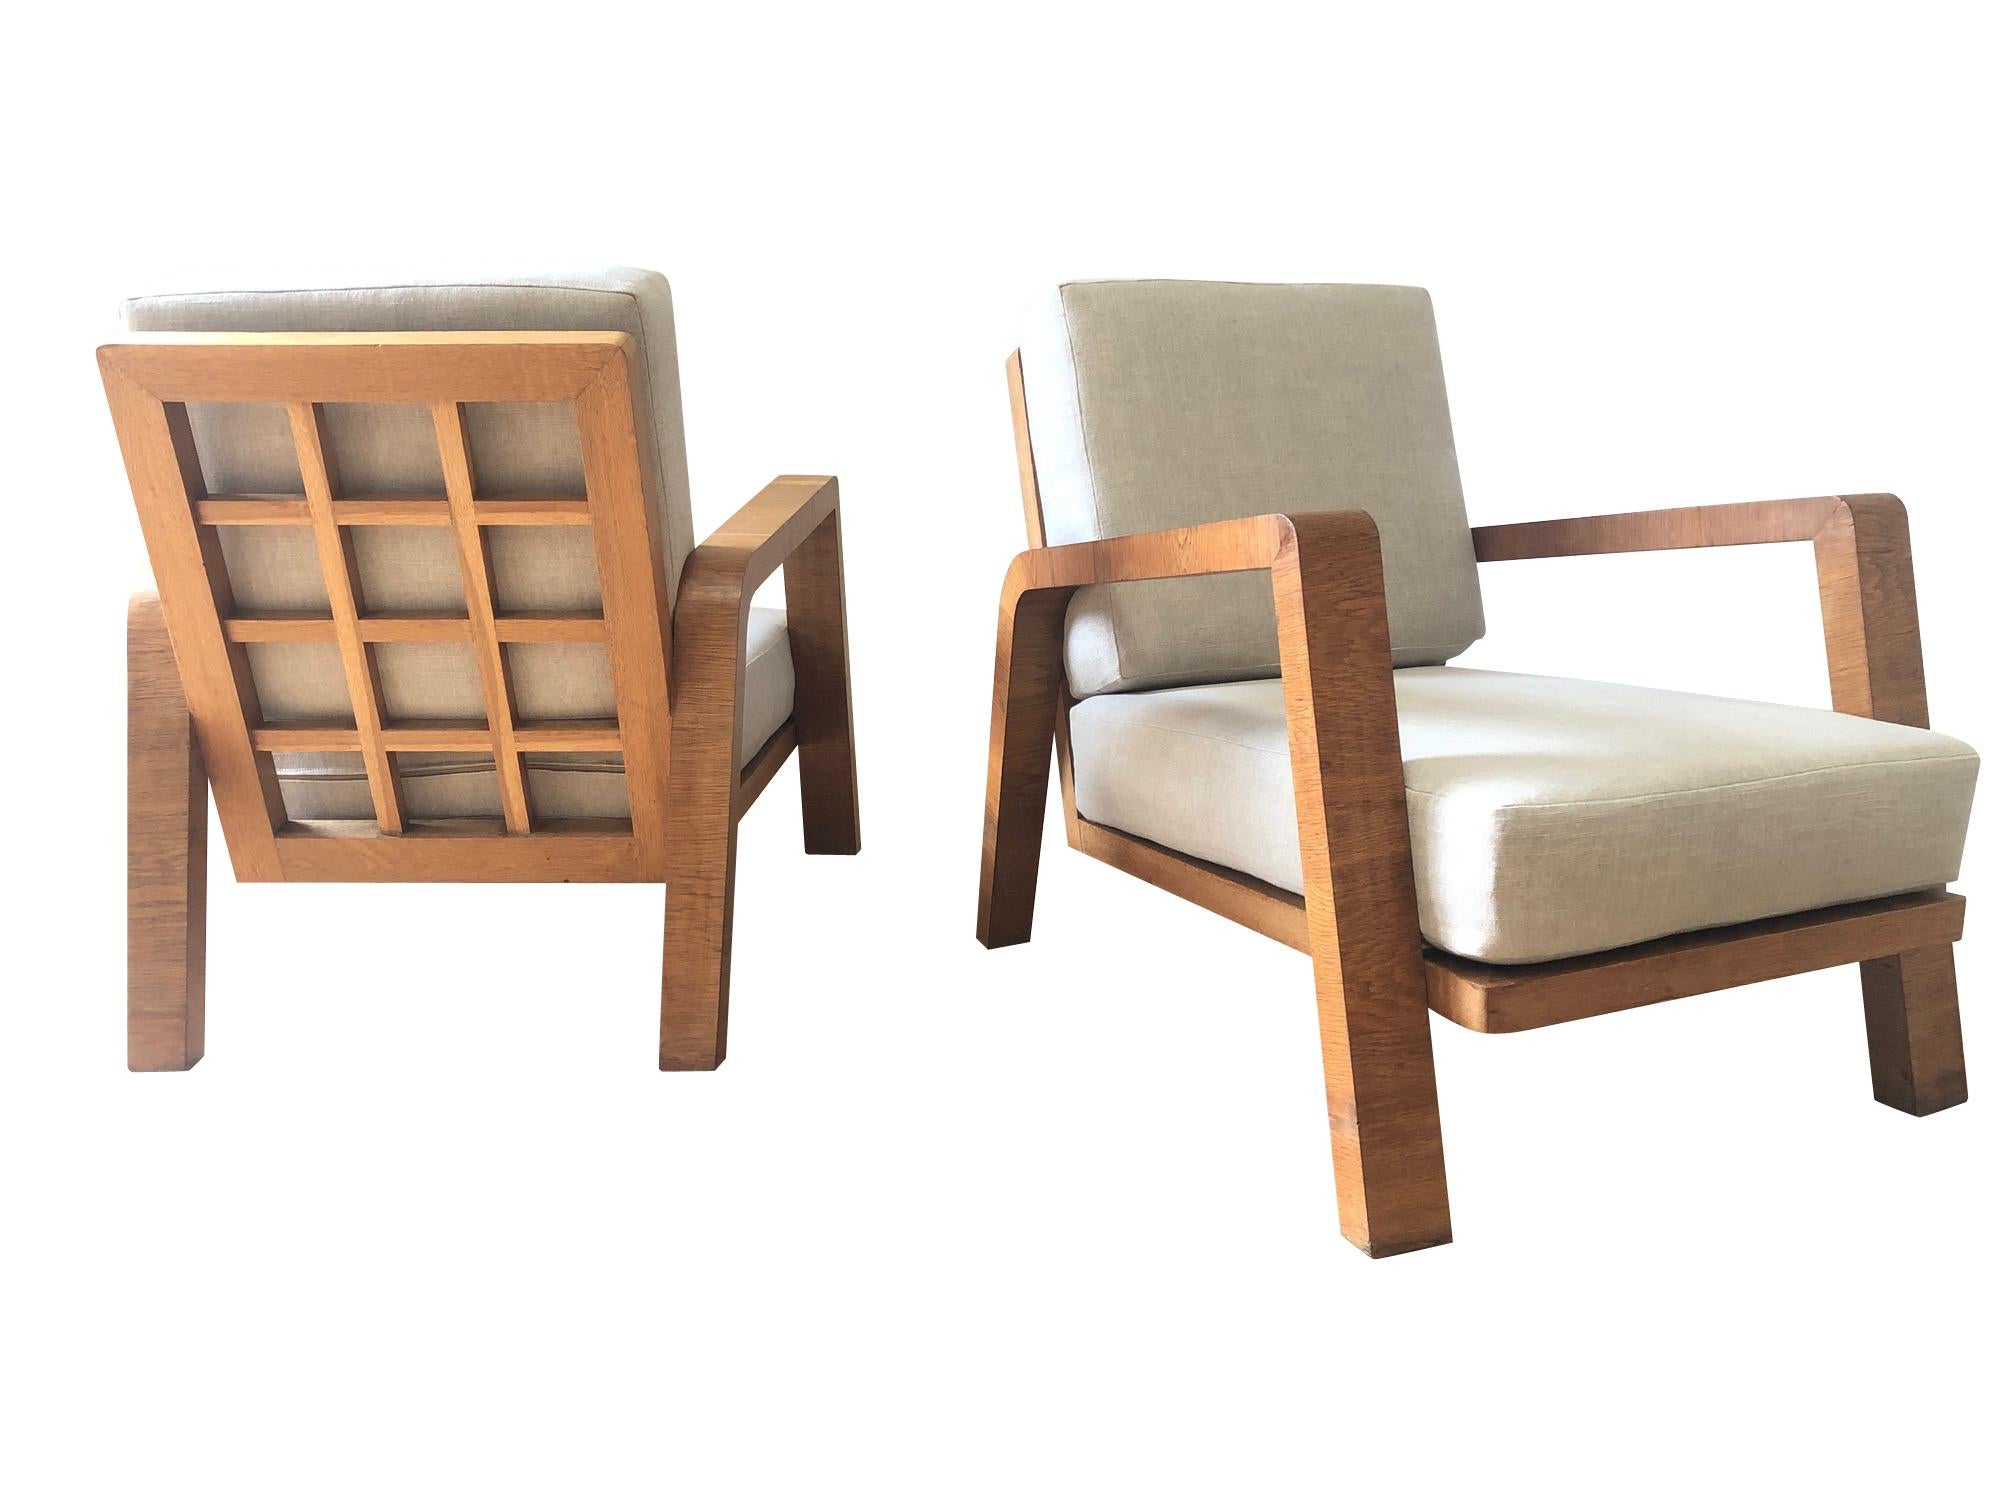 Midcentury French pair of side chairs in the style of Jean Royere
Decorative lattice back details
oakwood
New cushions and reupholstery.
   